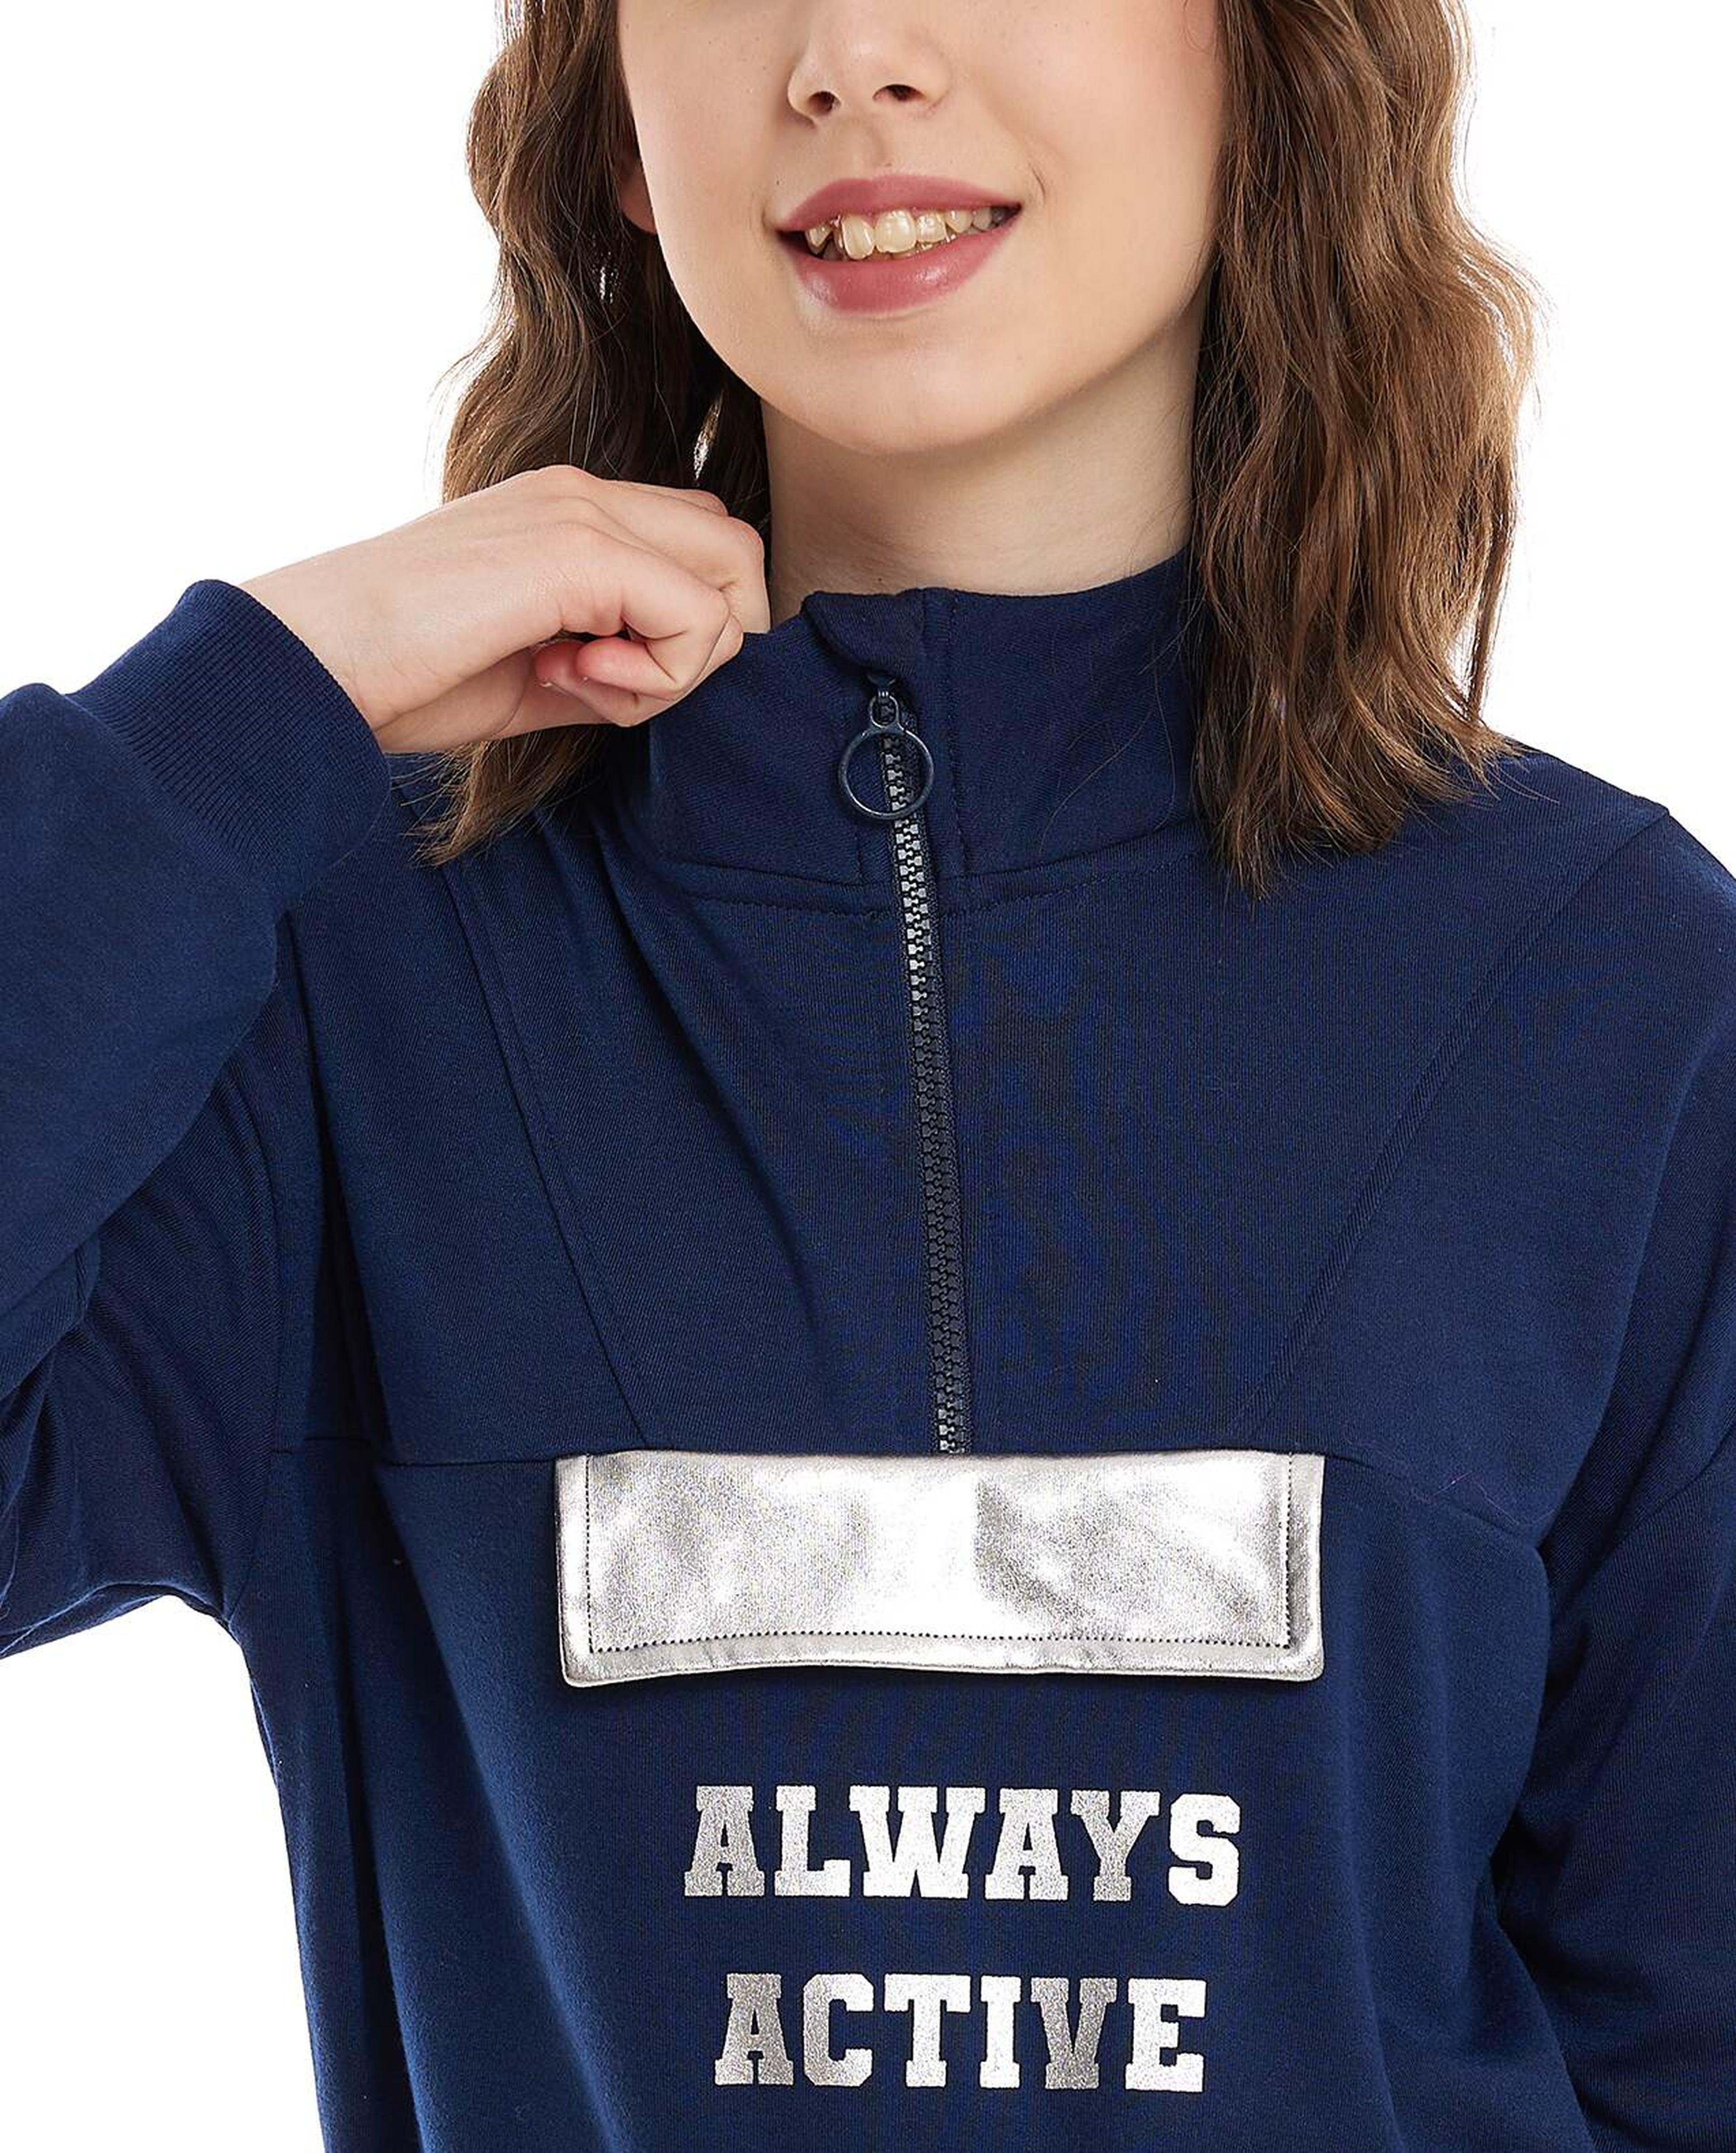 Printed Sweatshirt with High Neck and Long Sleeves